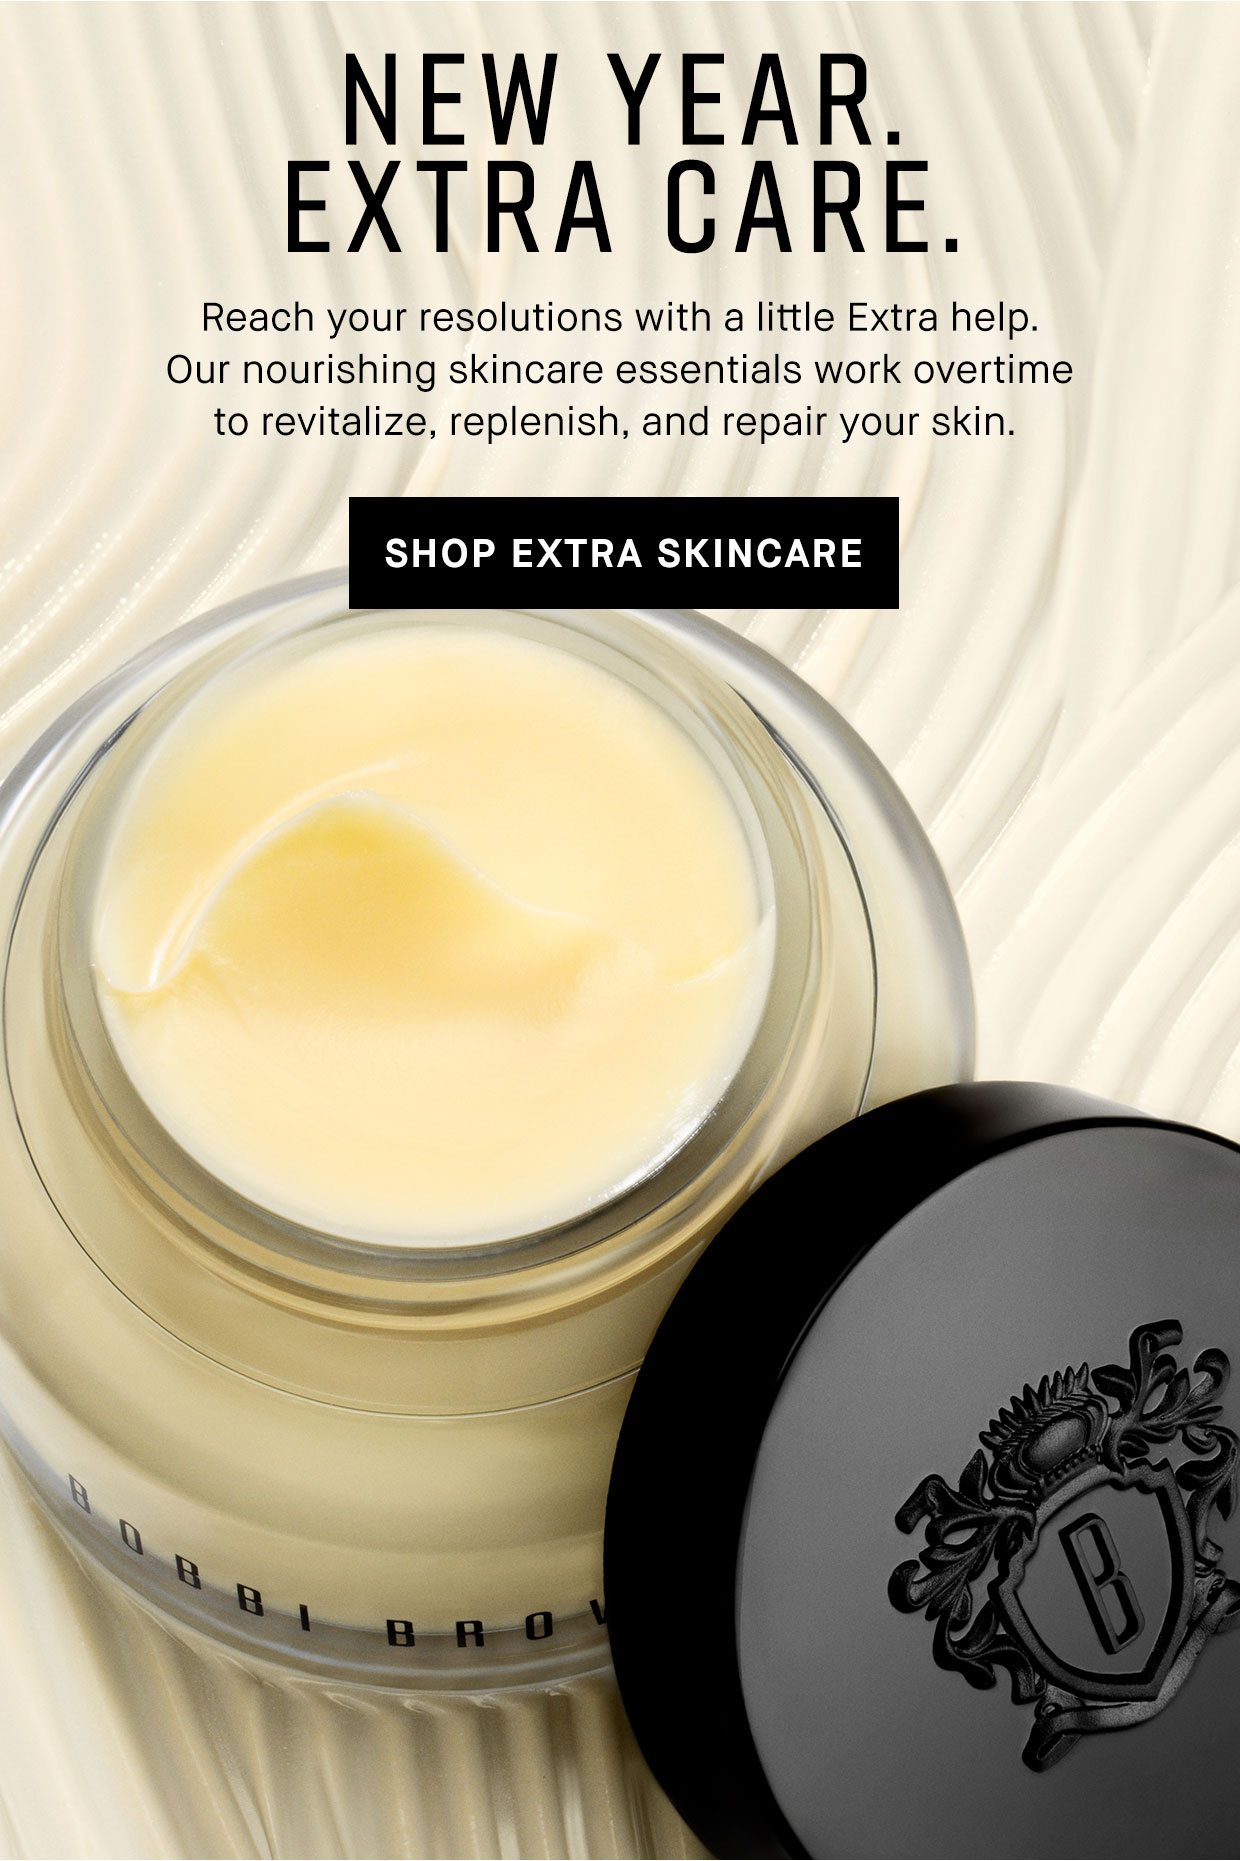 New Year. Extra Care. | Shop Extra Skincare